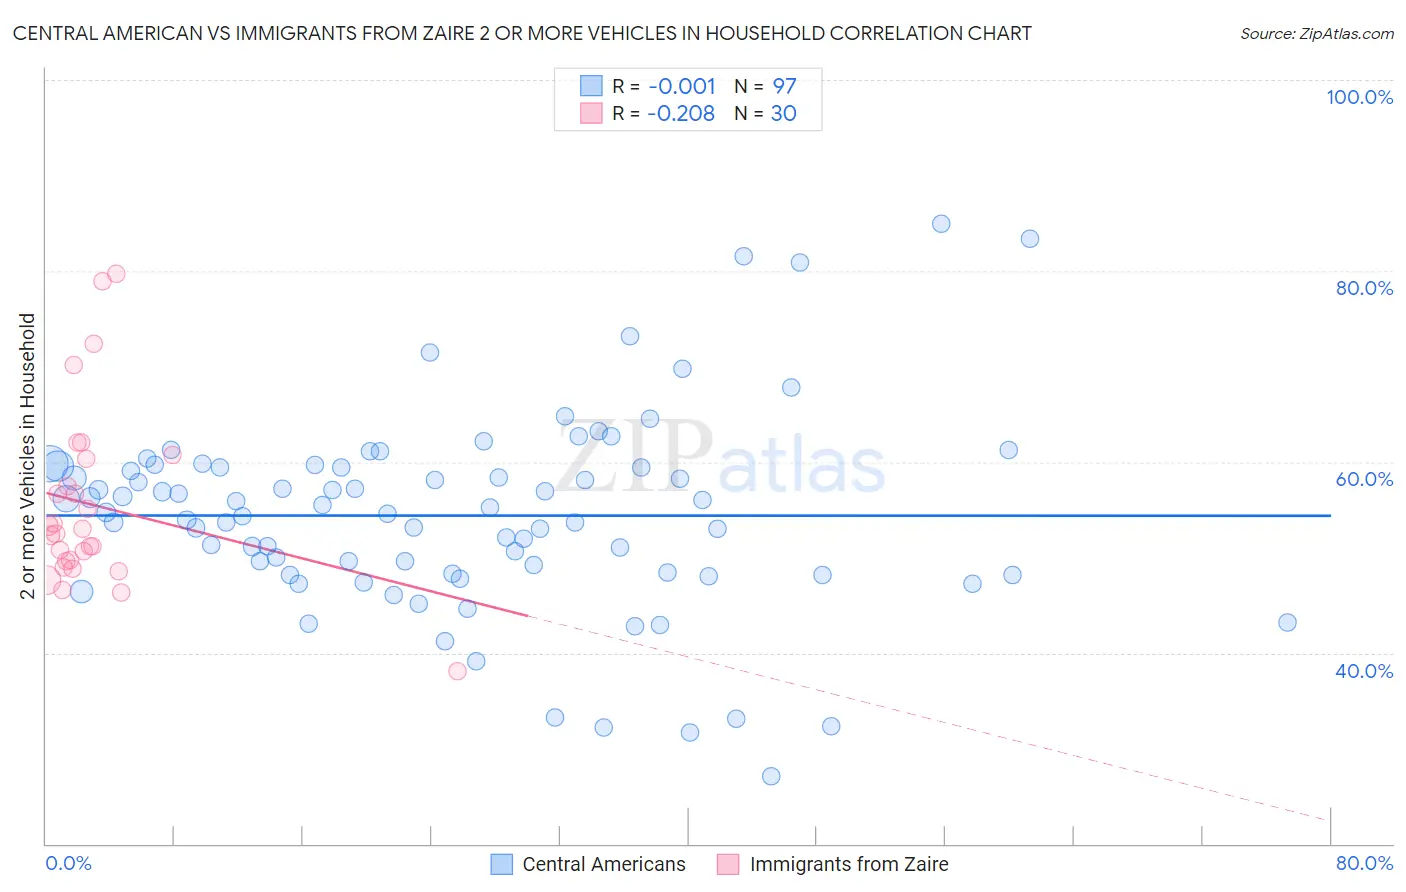 Central American vs Immigrants from Zaire 2 or more Vehicles in Household